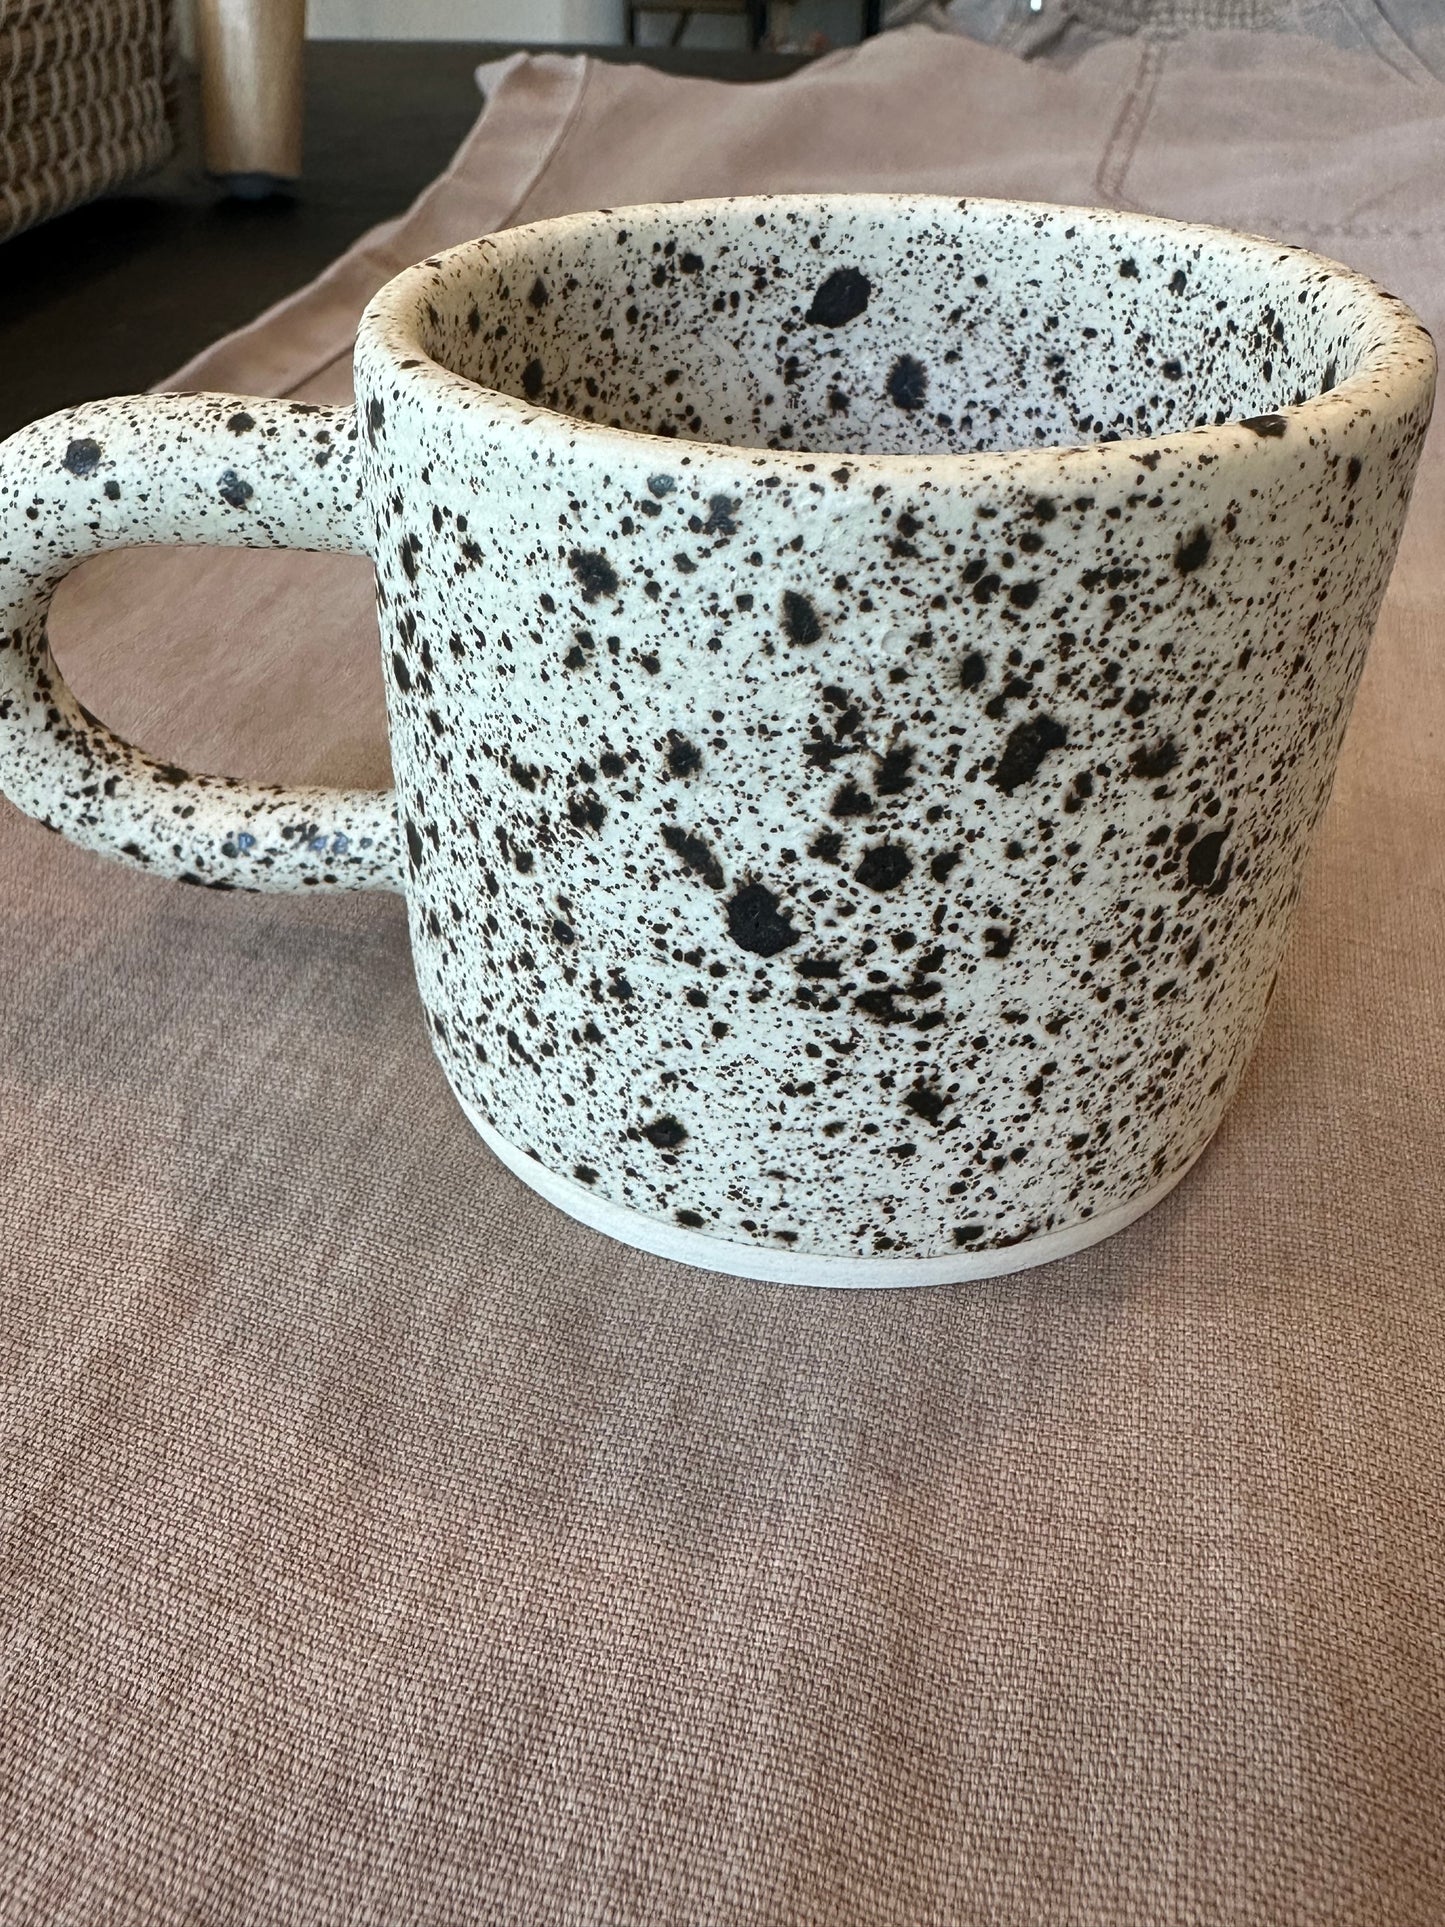 Stay Cozy Speckled Mugs